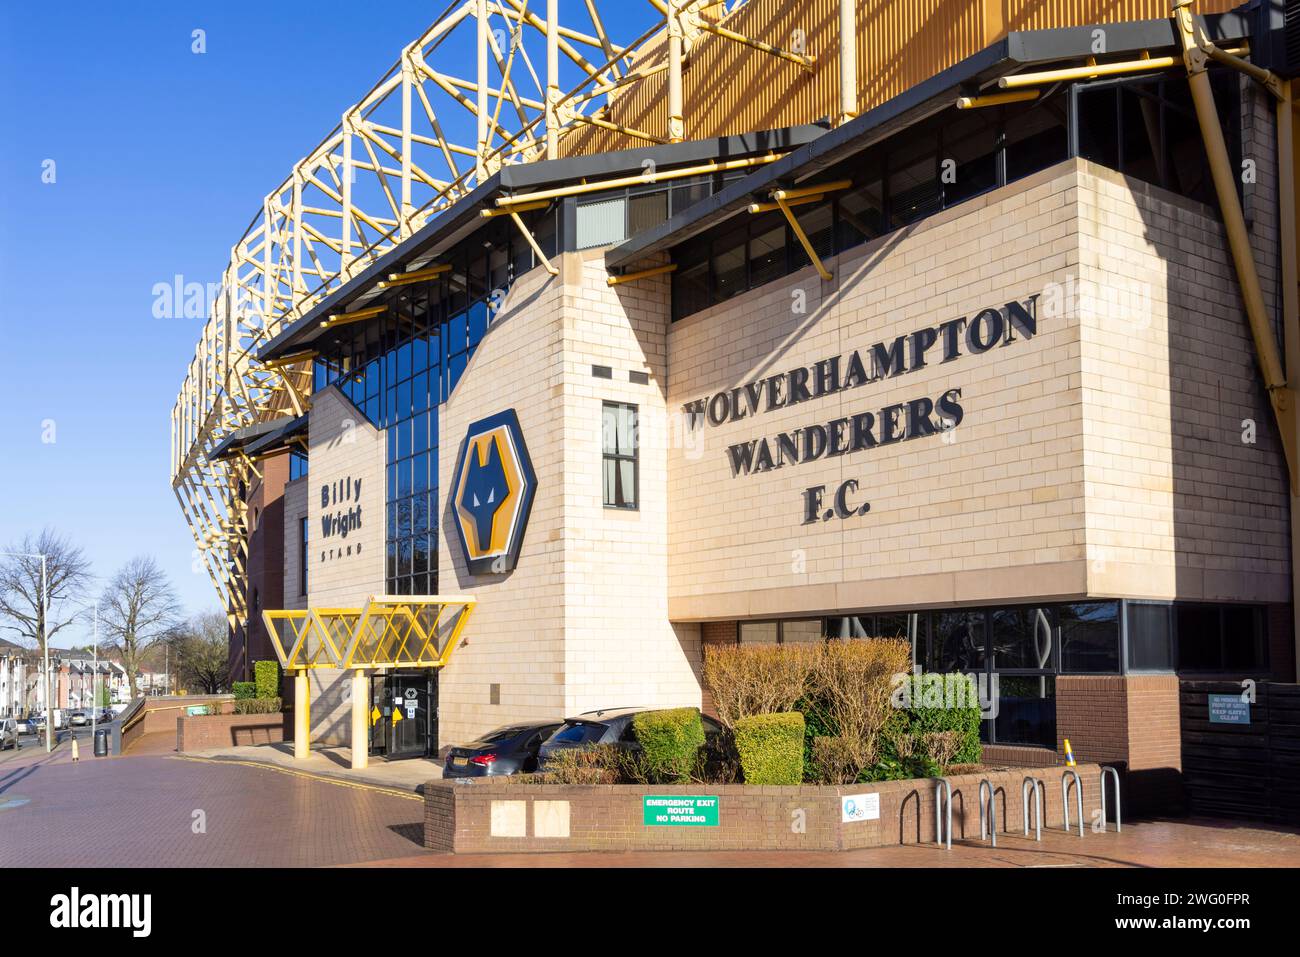 Wolverhampton Wanderers Football Club or 'Wolves' Wolverhampton Wanderers stadium in Wolverhampton West Midlands England UK GB Europe wolves fc Stock Photo